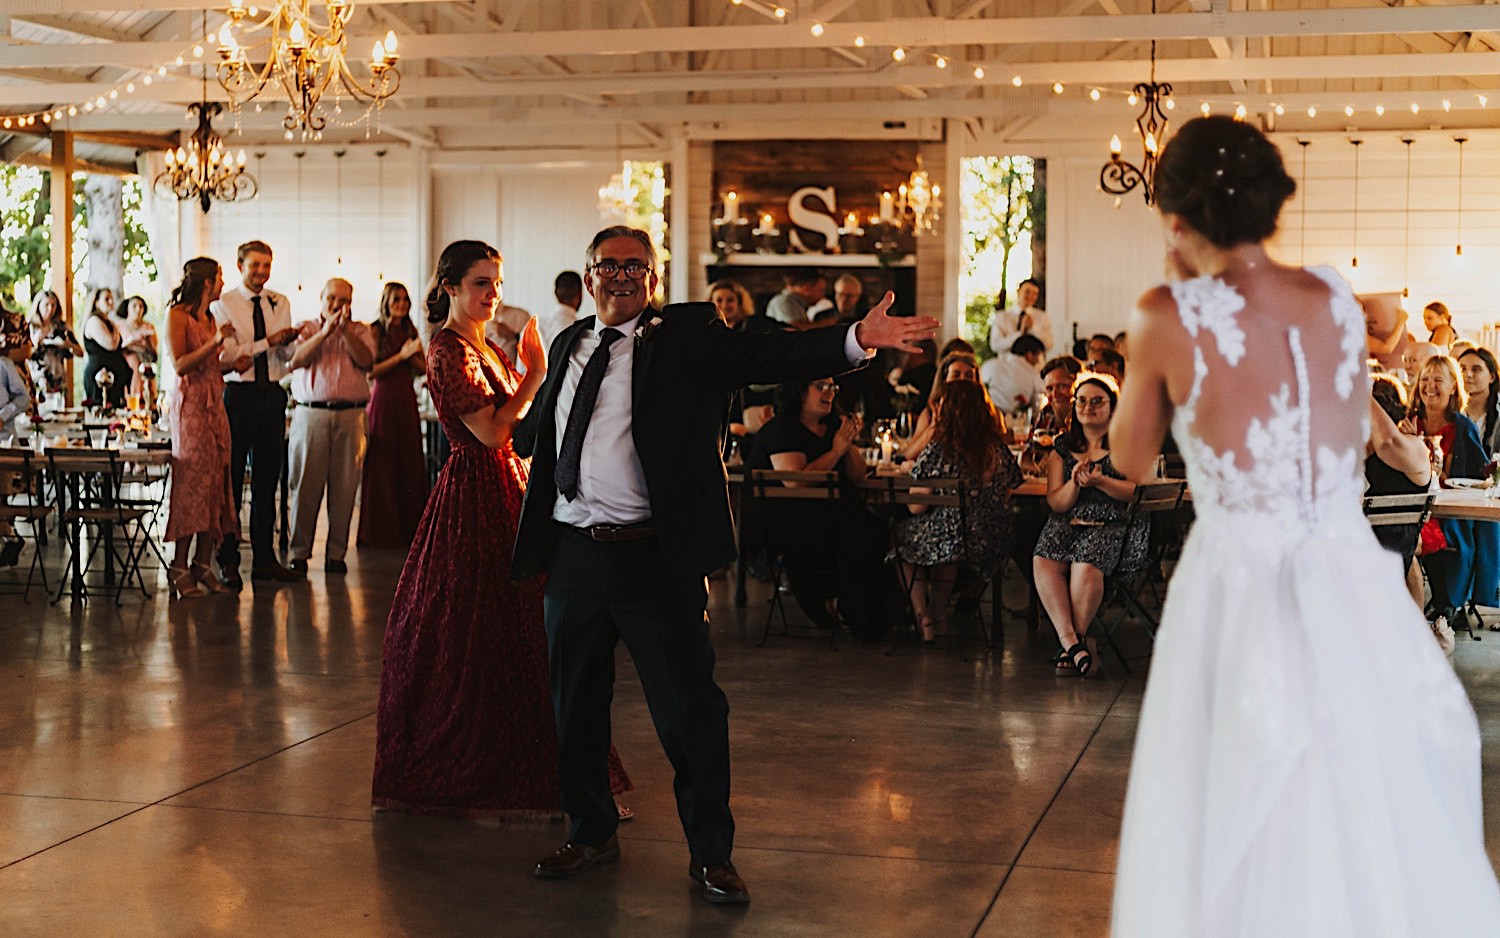 The father of the bride gestures towards her as the two dance during a wedding reception at Legacy Hill Farm